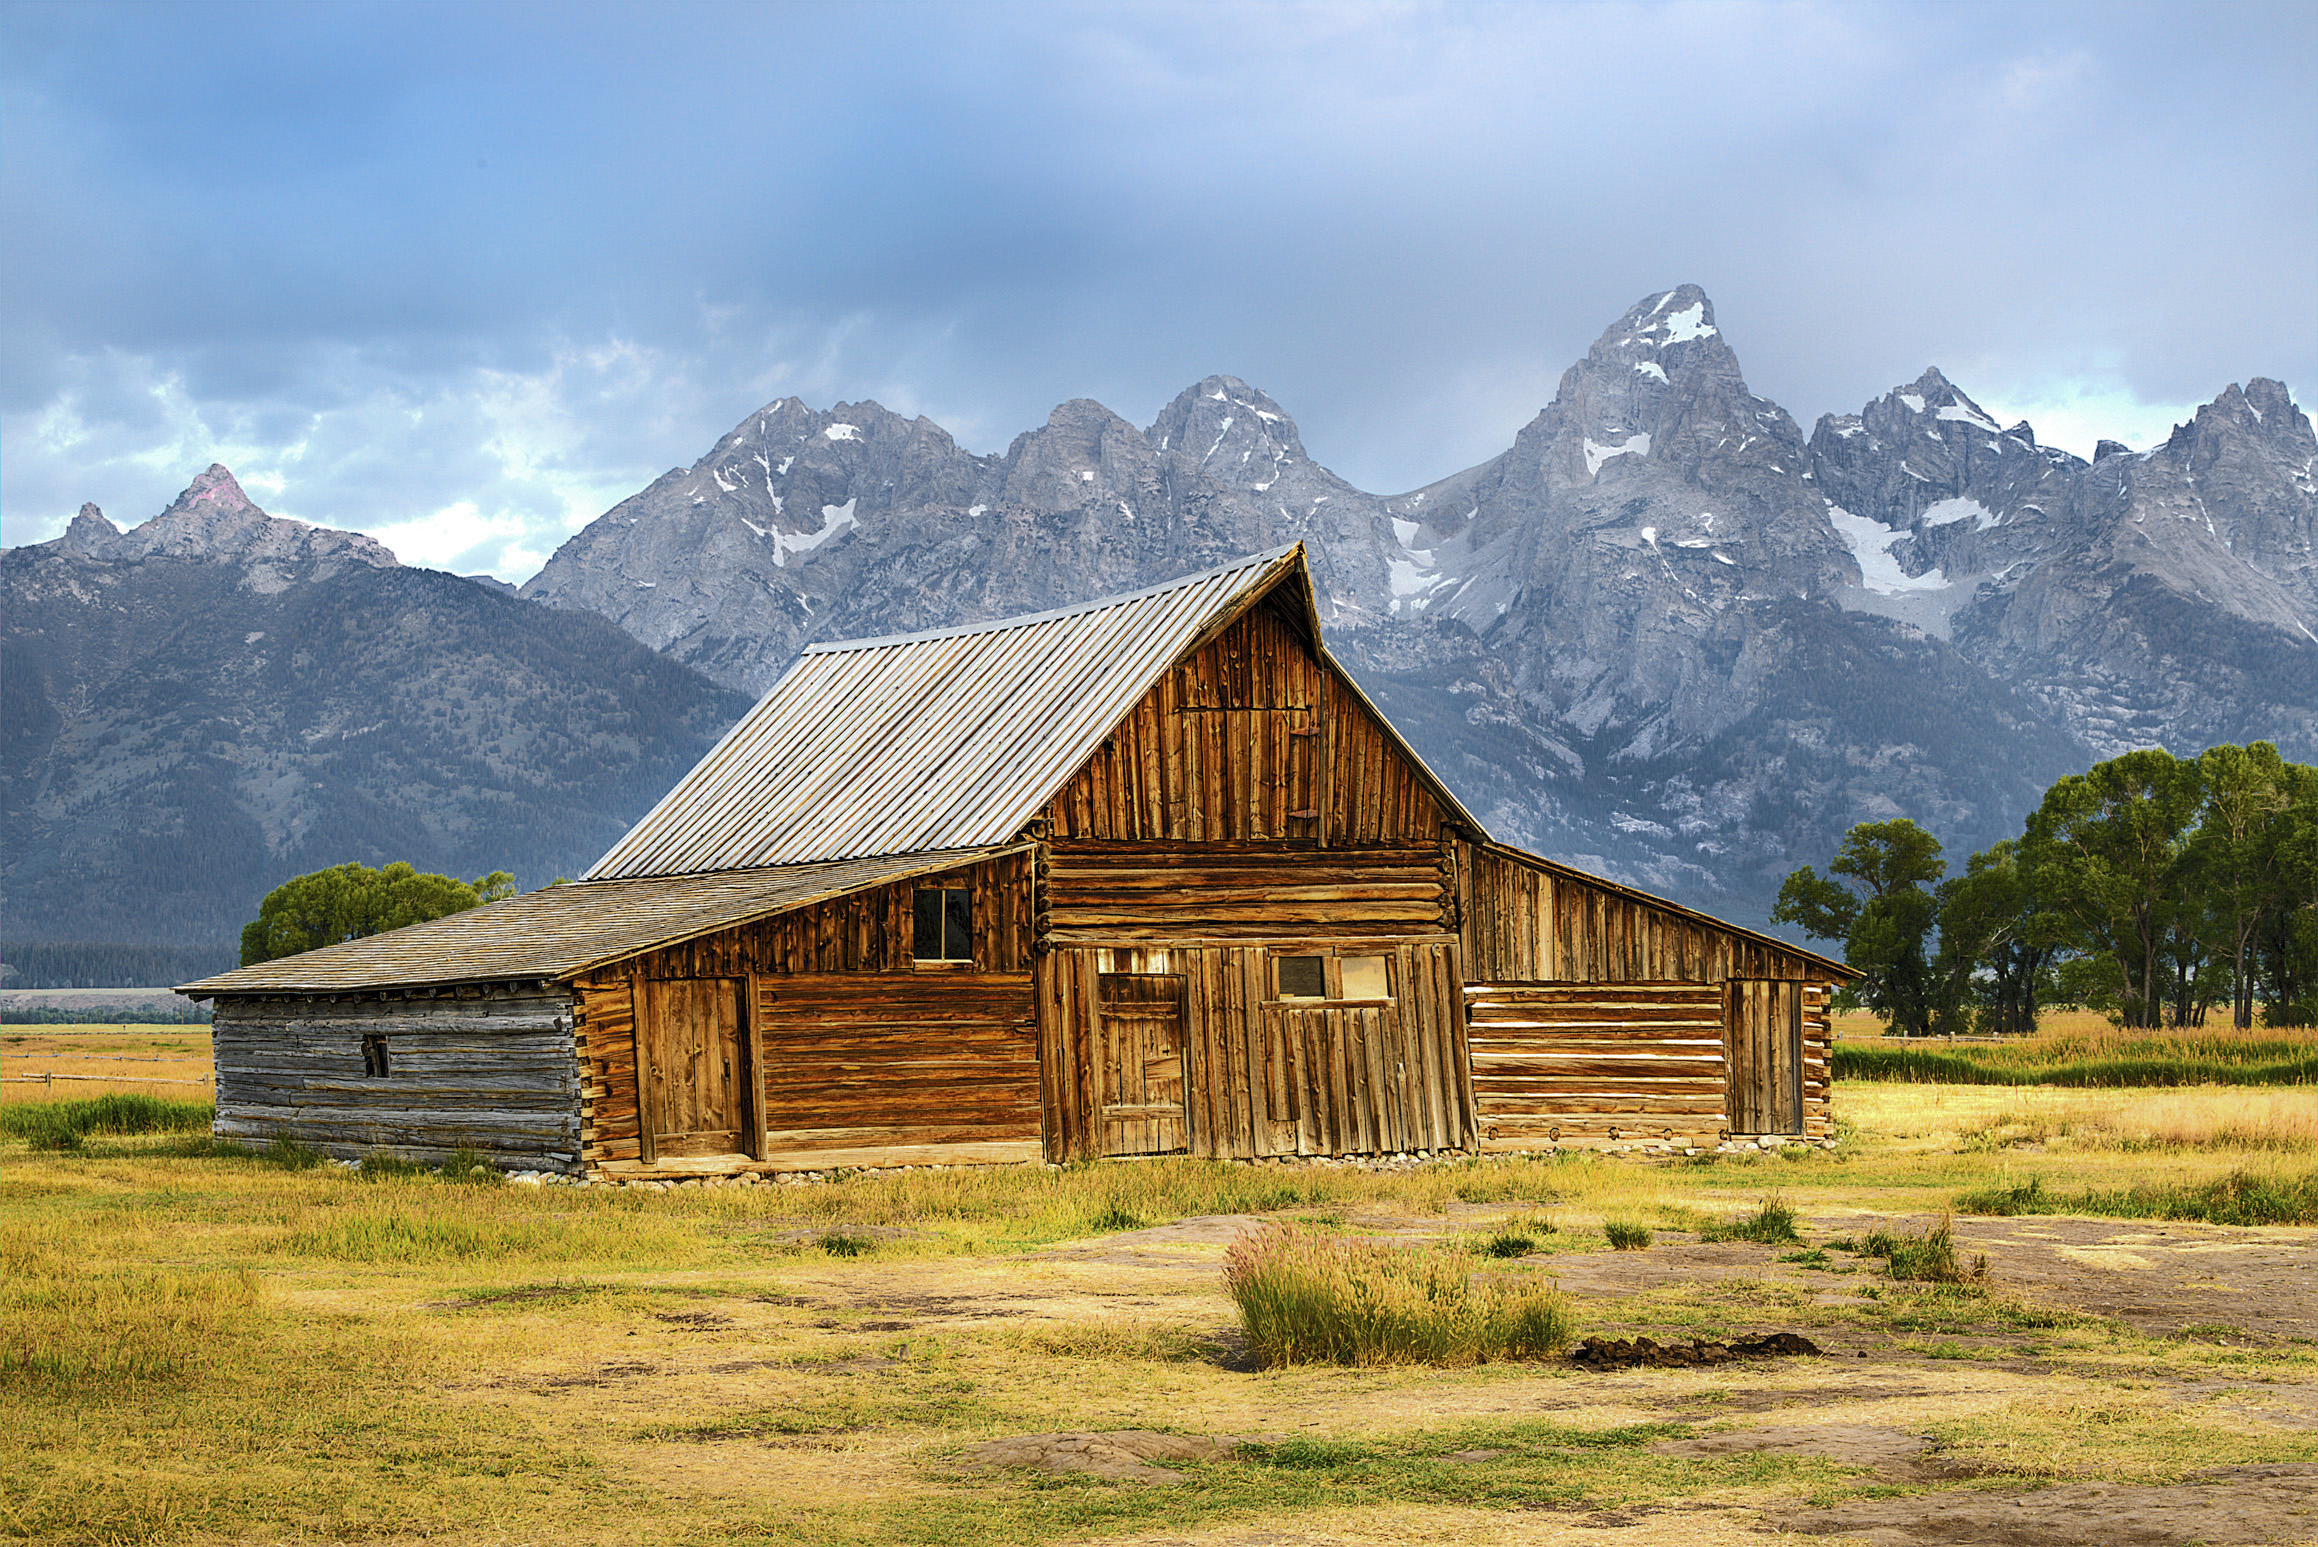 The famous T.A. Moulton Barn with the Grand Teton towering behind it.